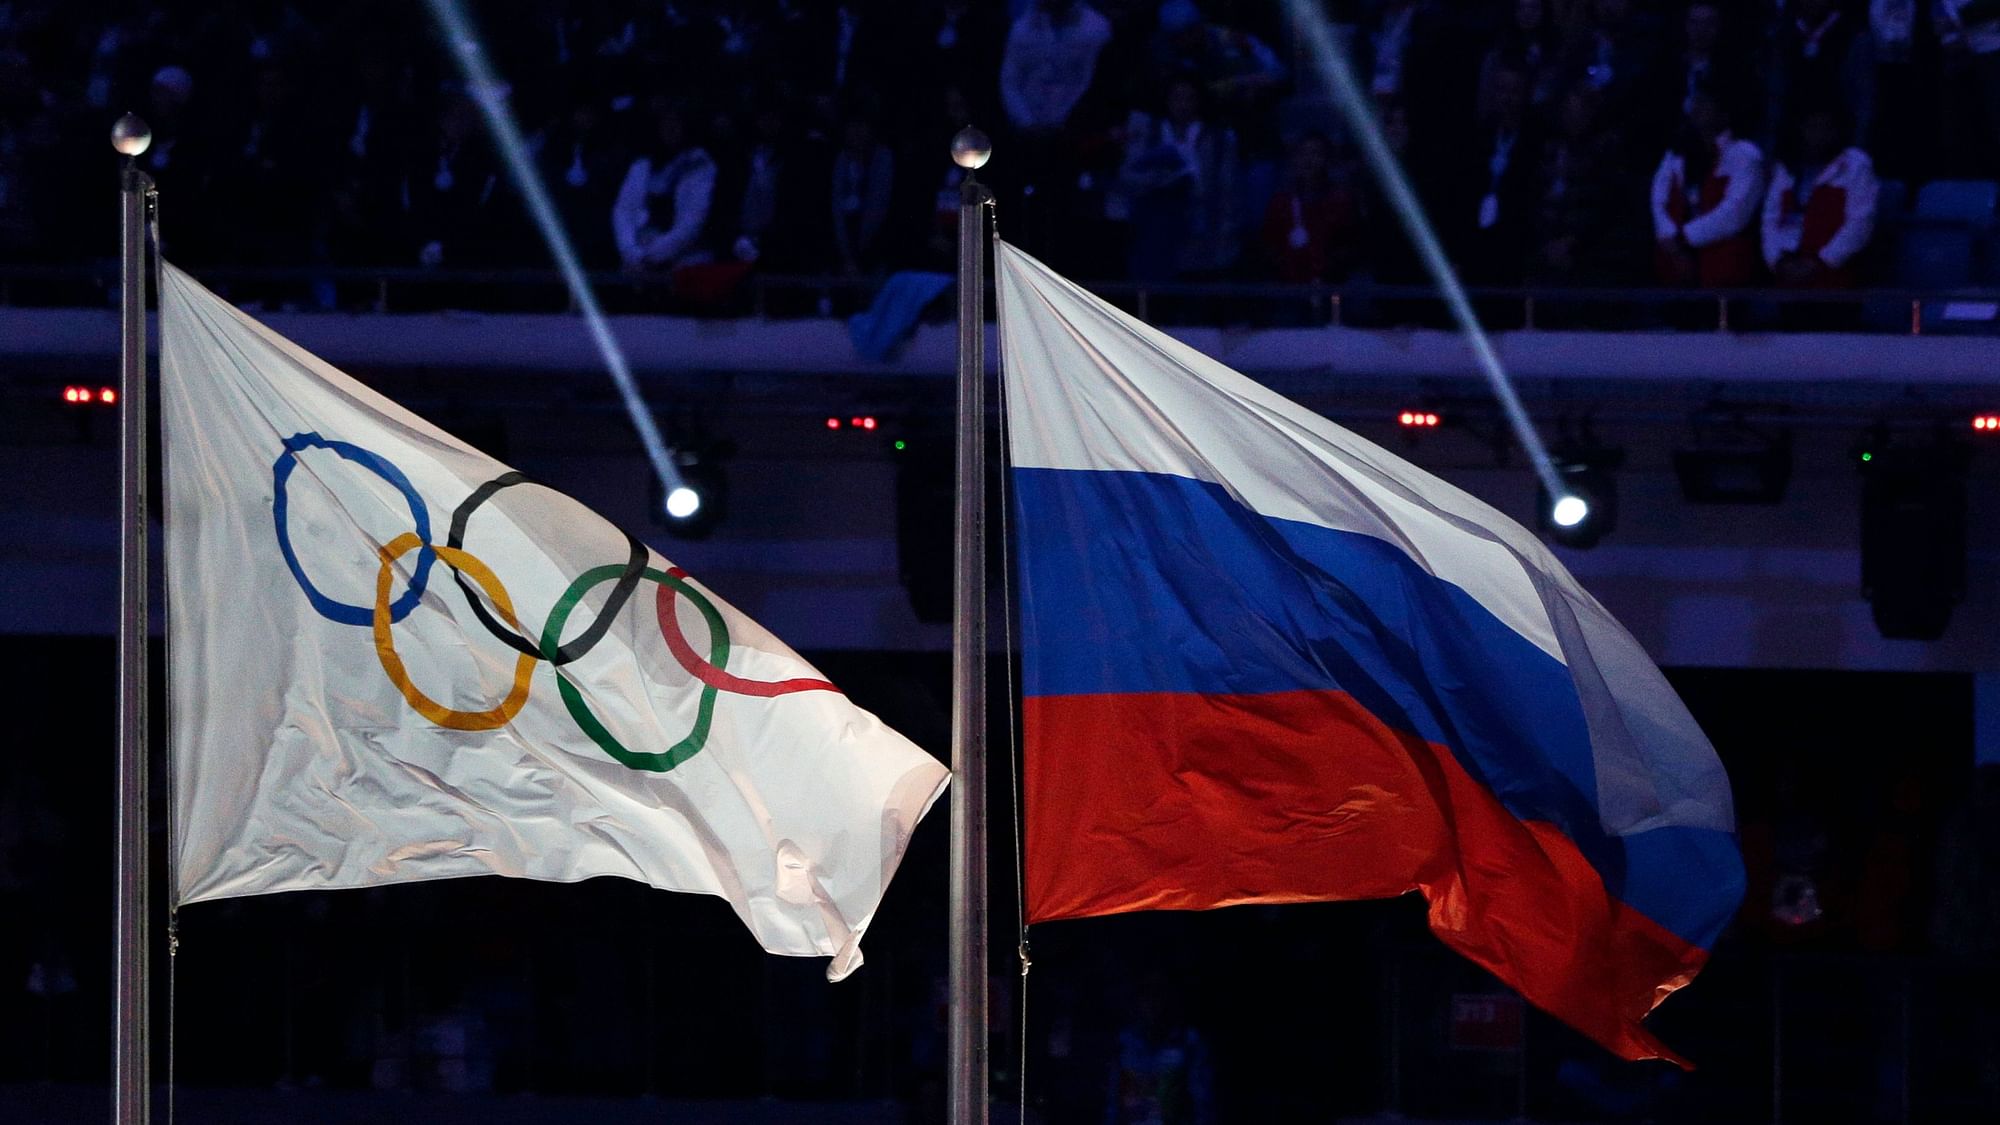 The World Anti-Doping Agency ban will rule Russia out of the 2020 Tokyo Olympics, the 2022 Beijing Winter Olympics and the 2022 World Cup in Qatar.